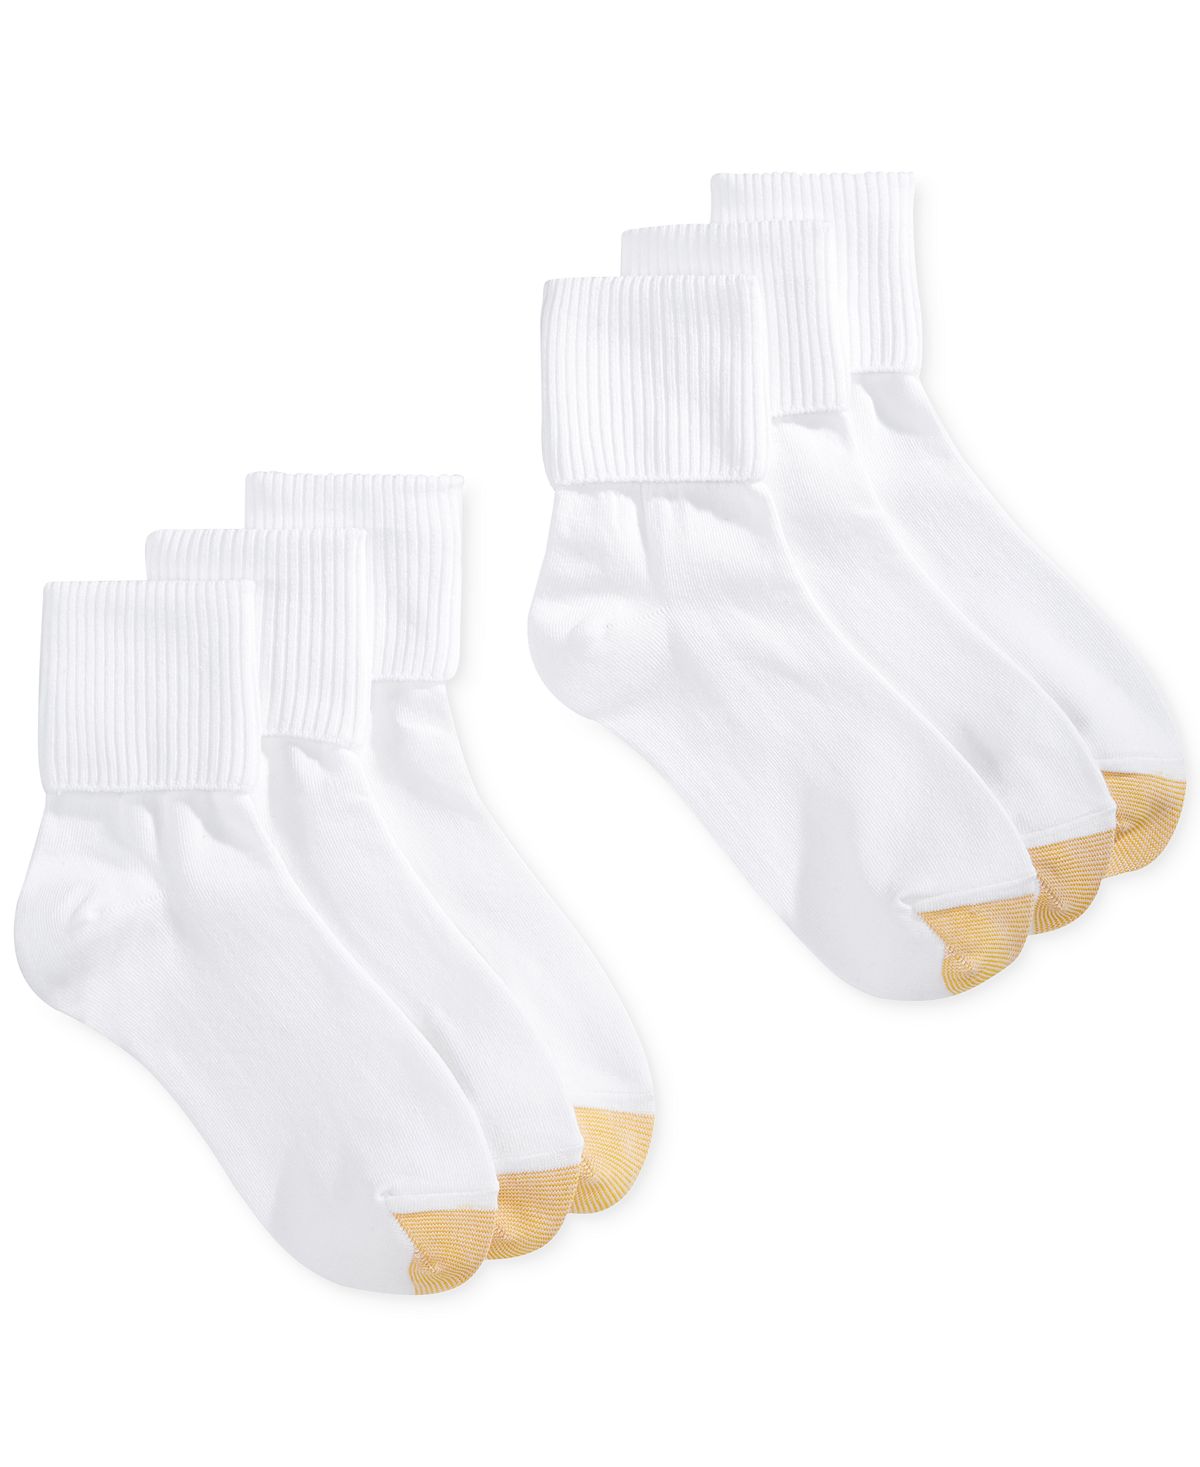 Gold Toe Wo Turn Cuff 6 Pack Socks Also Available In Extended Sizes White